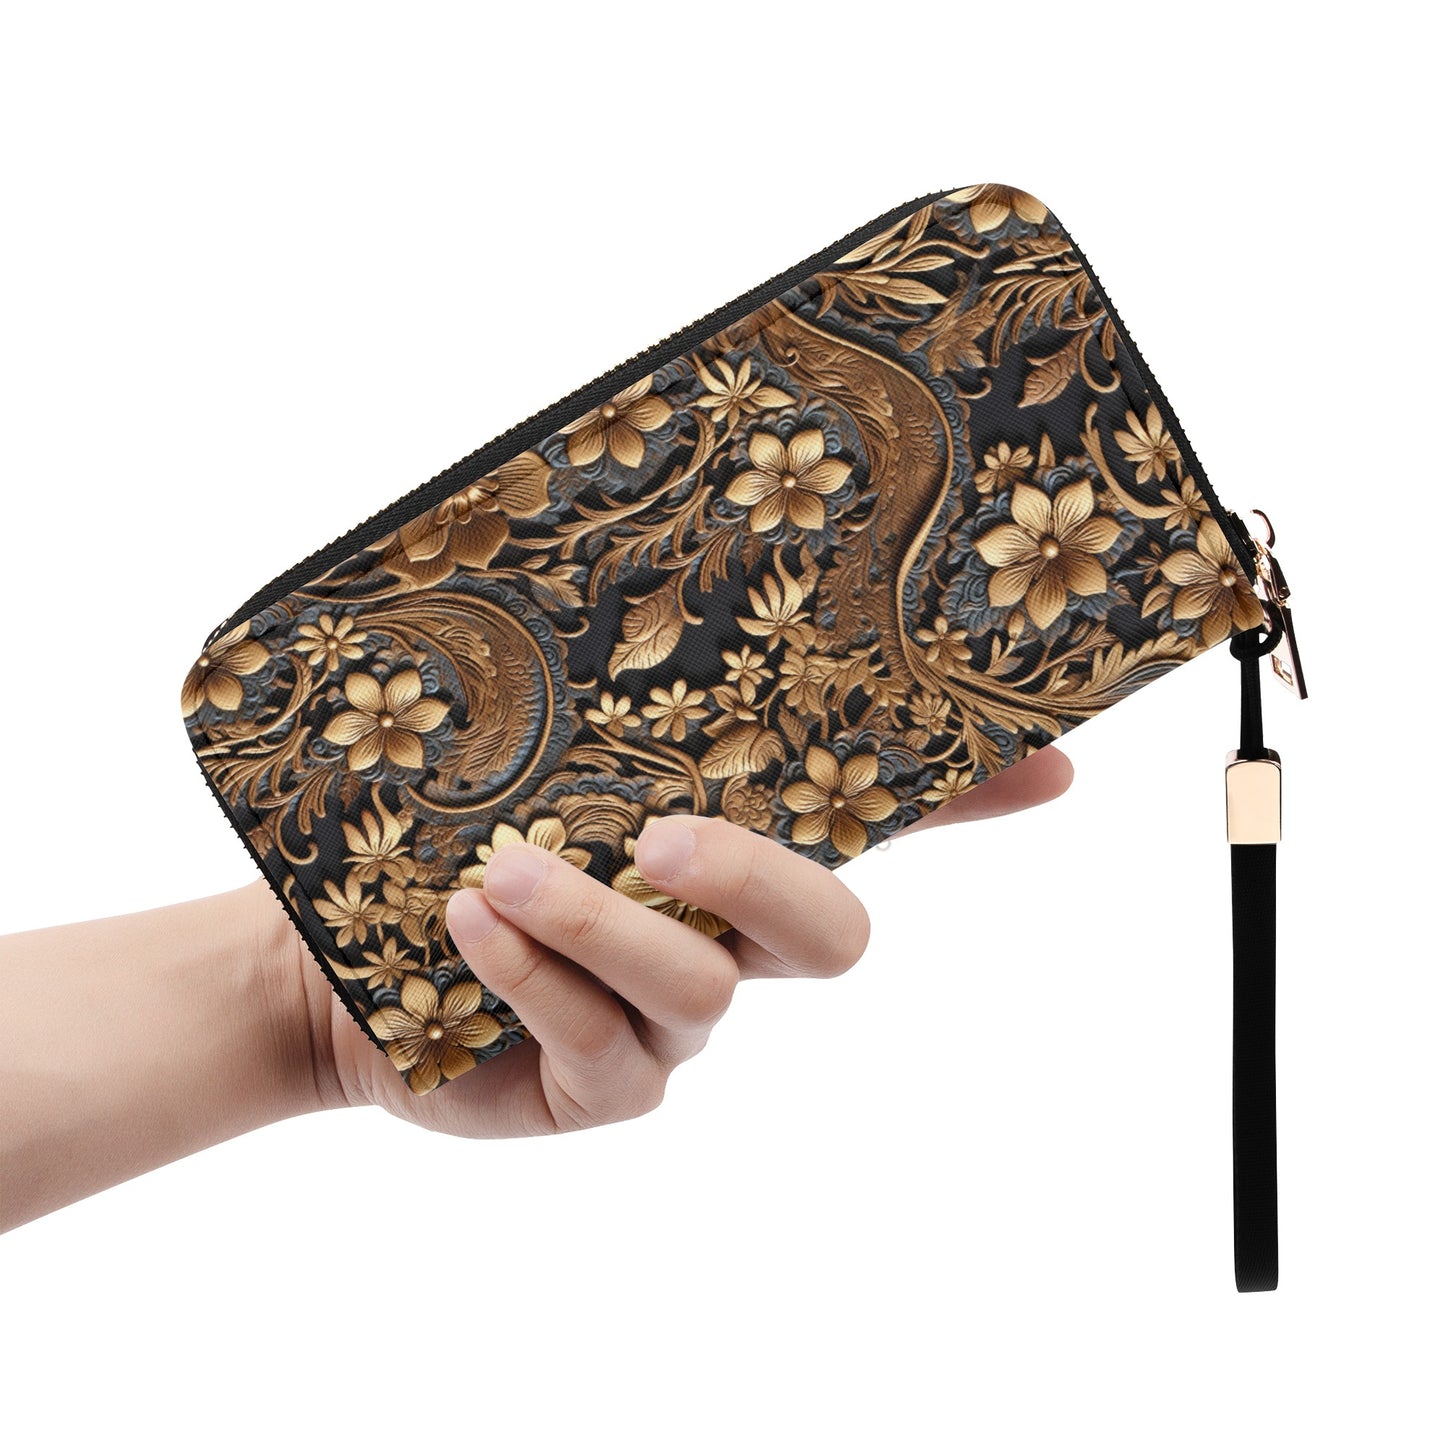 Print of Tooled Leather Large Gold Flowers with Blue Leaf Swirl Accents - Wristlet Wallet Leather (PU)